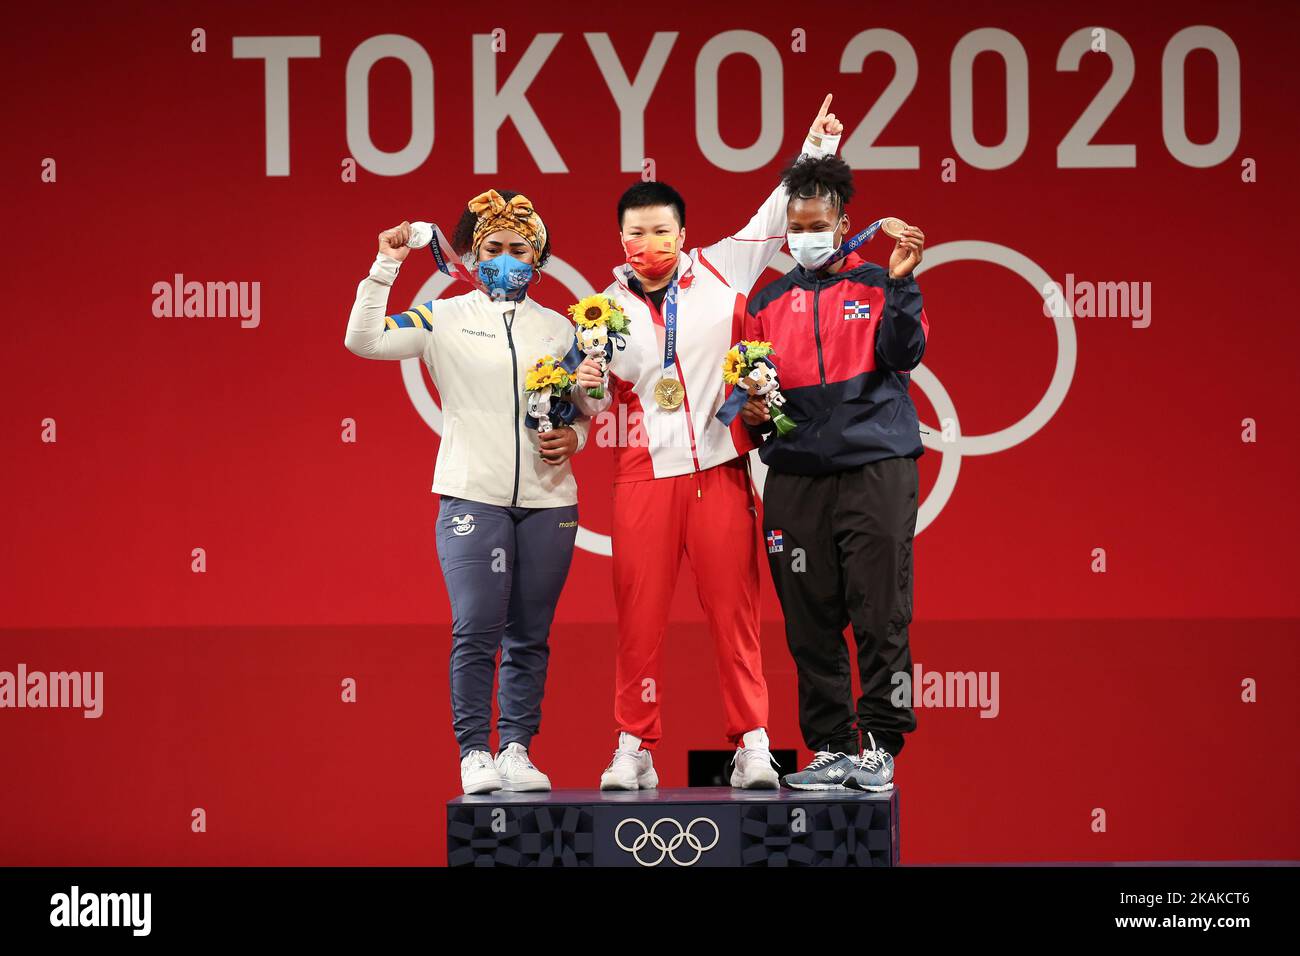 AUGUST 02, 2021 - TOKYO, JAPAN: Wang ZHOUYU of China (center), Tamara SALAZAR of Ecuador (left) and Crismery SANTANA of Dominican Republic (right) win respectively the gold, silver and bronze medals in the Weightlifting Women's 87kg at the Tokyo 2020 Olympic Games (Photo by Mickael Chavet/RX) Stock Photo